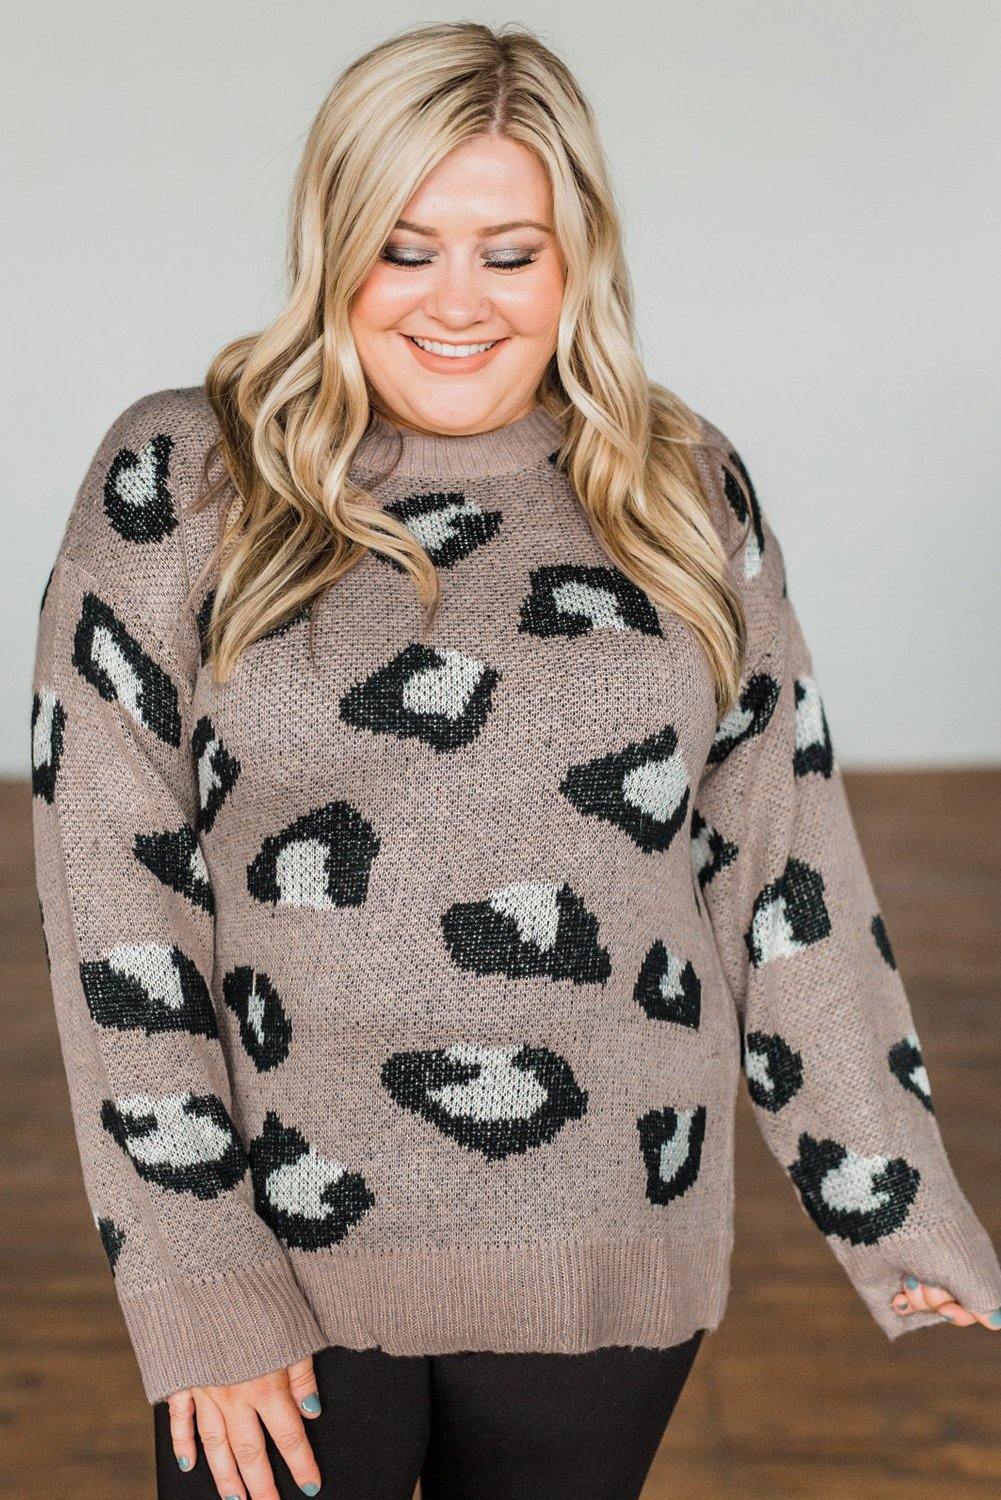 Crew Neck Knitted Plus Size Sweater - L & M Kee, LLC